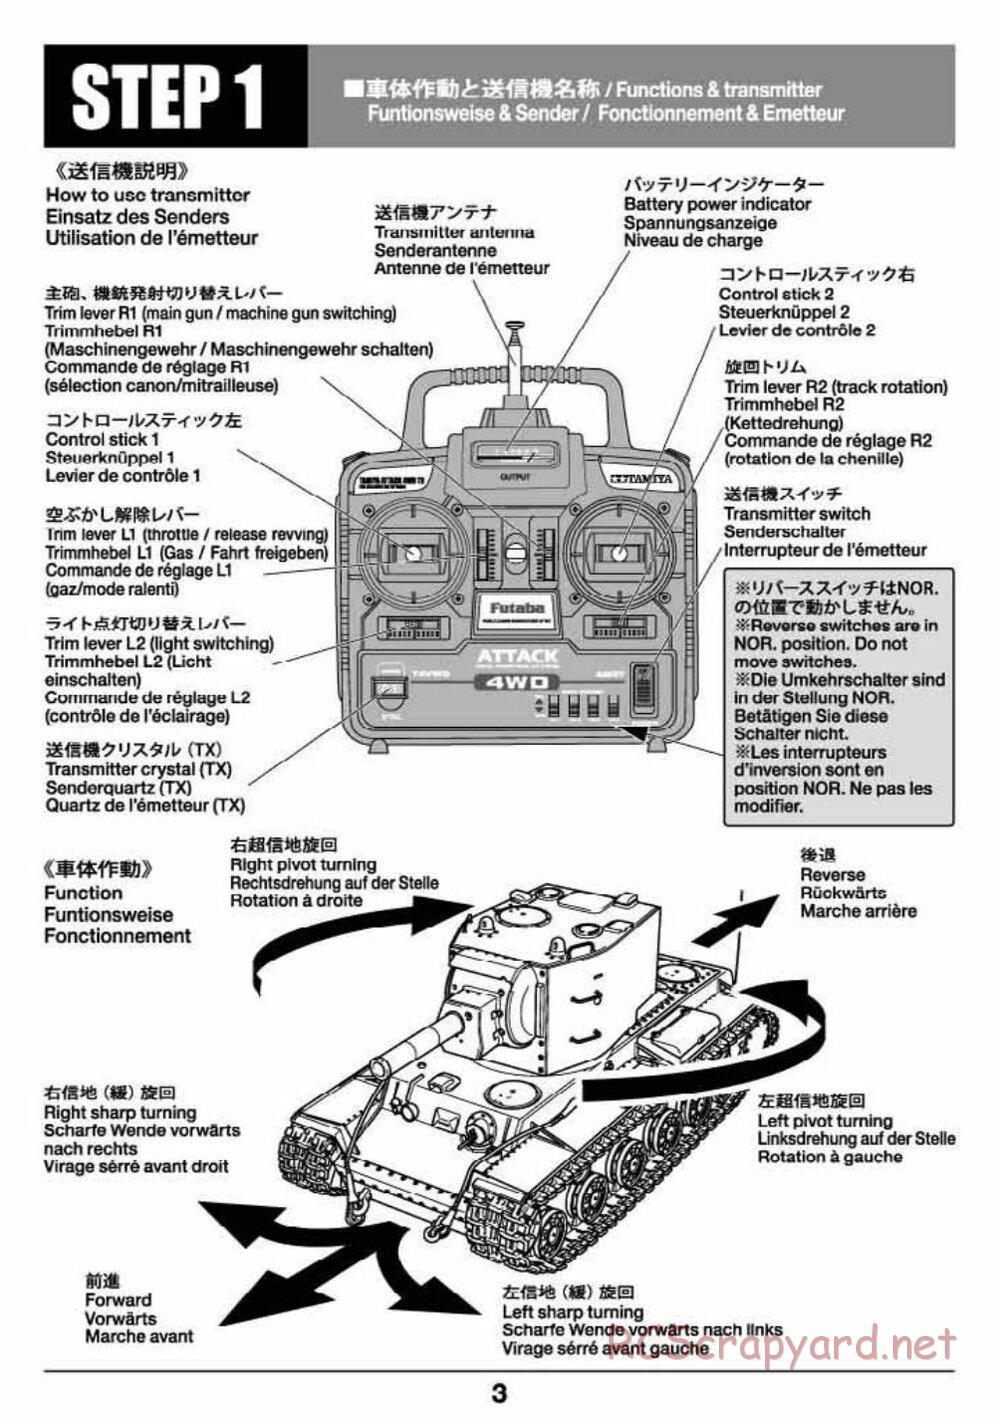 Tamiya - Russian Heavy Tank KV-2 Gigant - 1/16 Scale Chassis - Operation Manual - Page 3